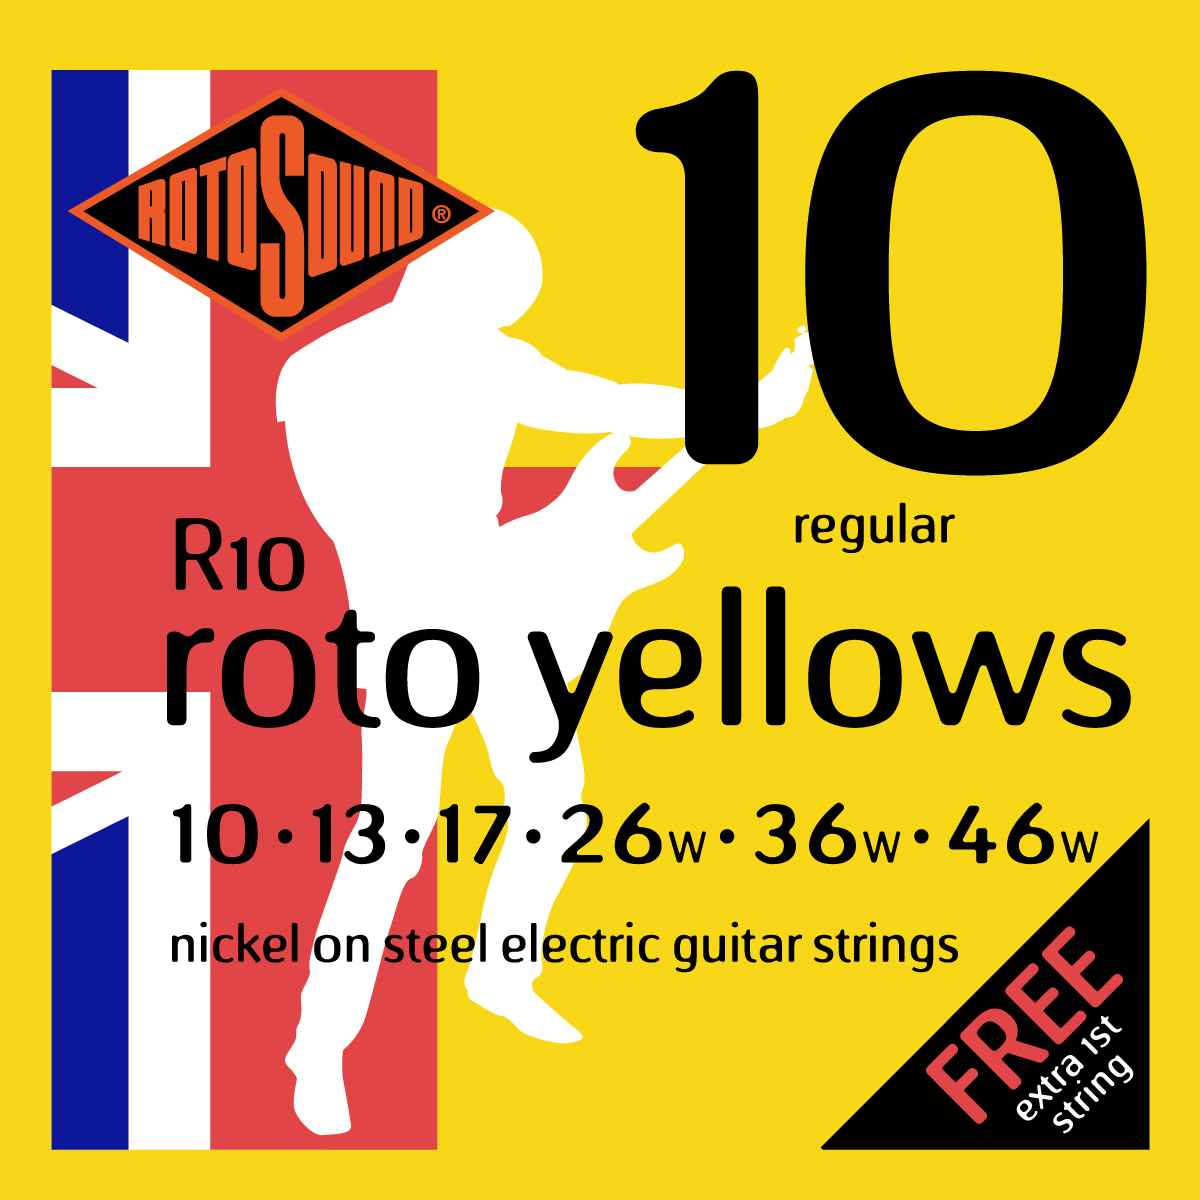 R10 Rotosound Roto nickel wound electric guitar strings. Best quality affordable giutar string for rock pop country metal funk blues